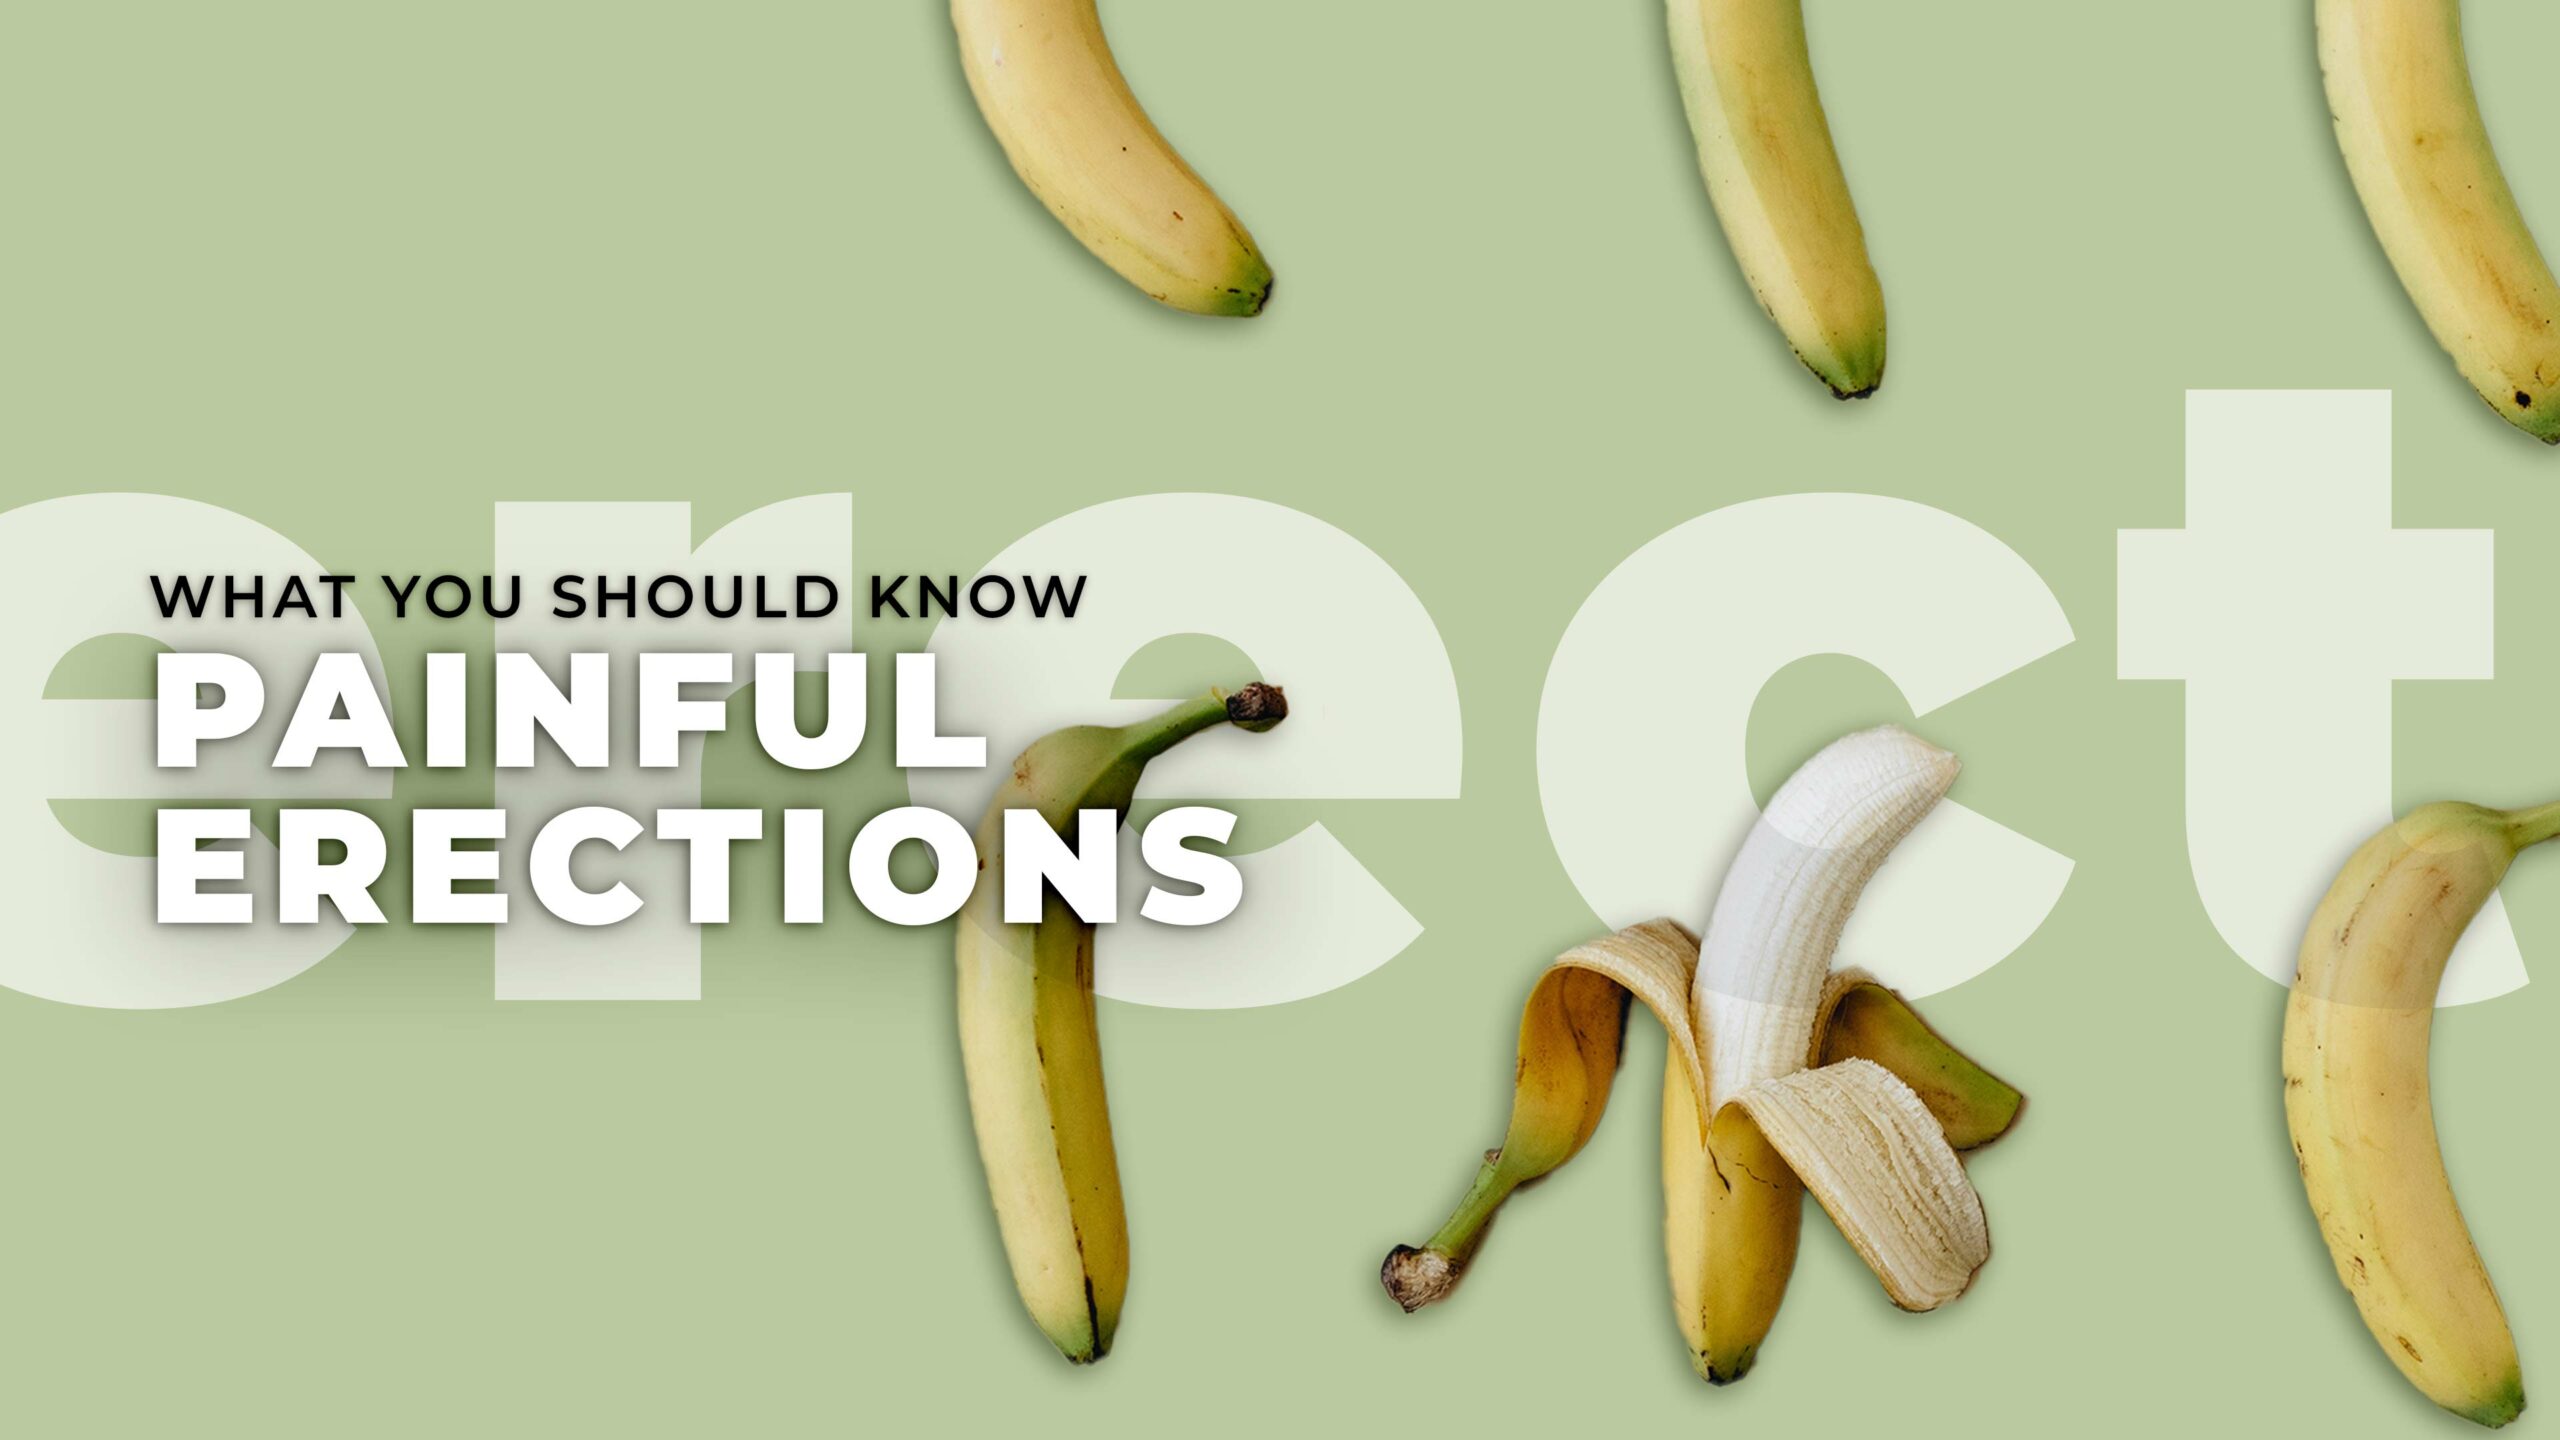 Painful Erections What You Should Know